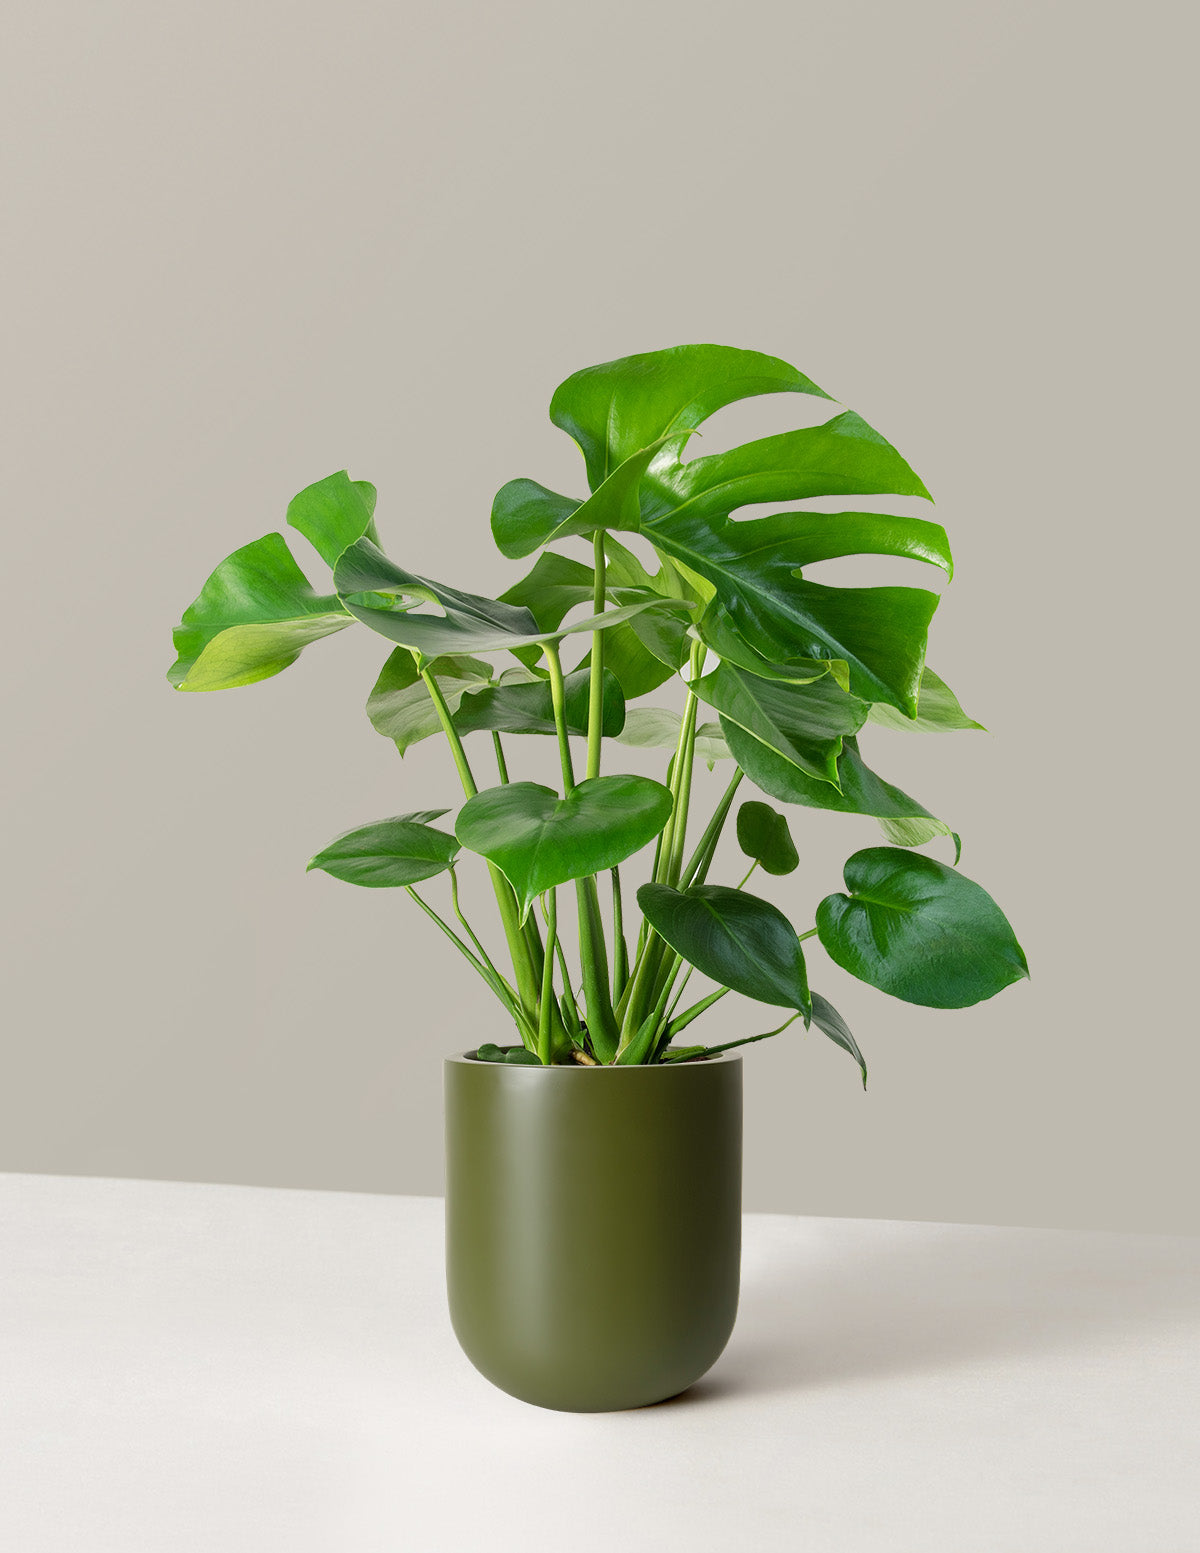 Whether to Keep Your Plant in Its Grow Pot or Pot It - The Sill